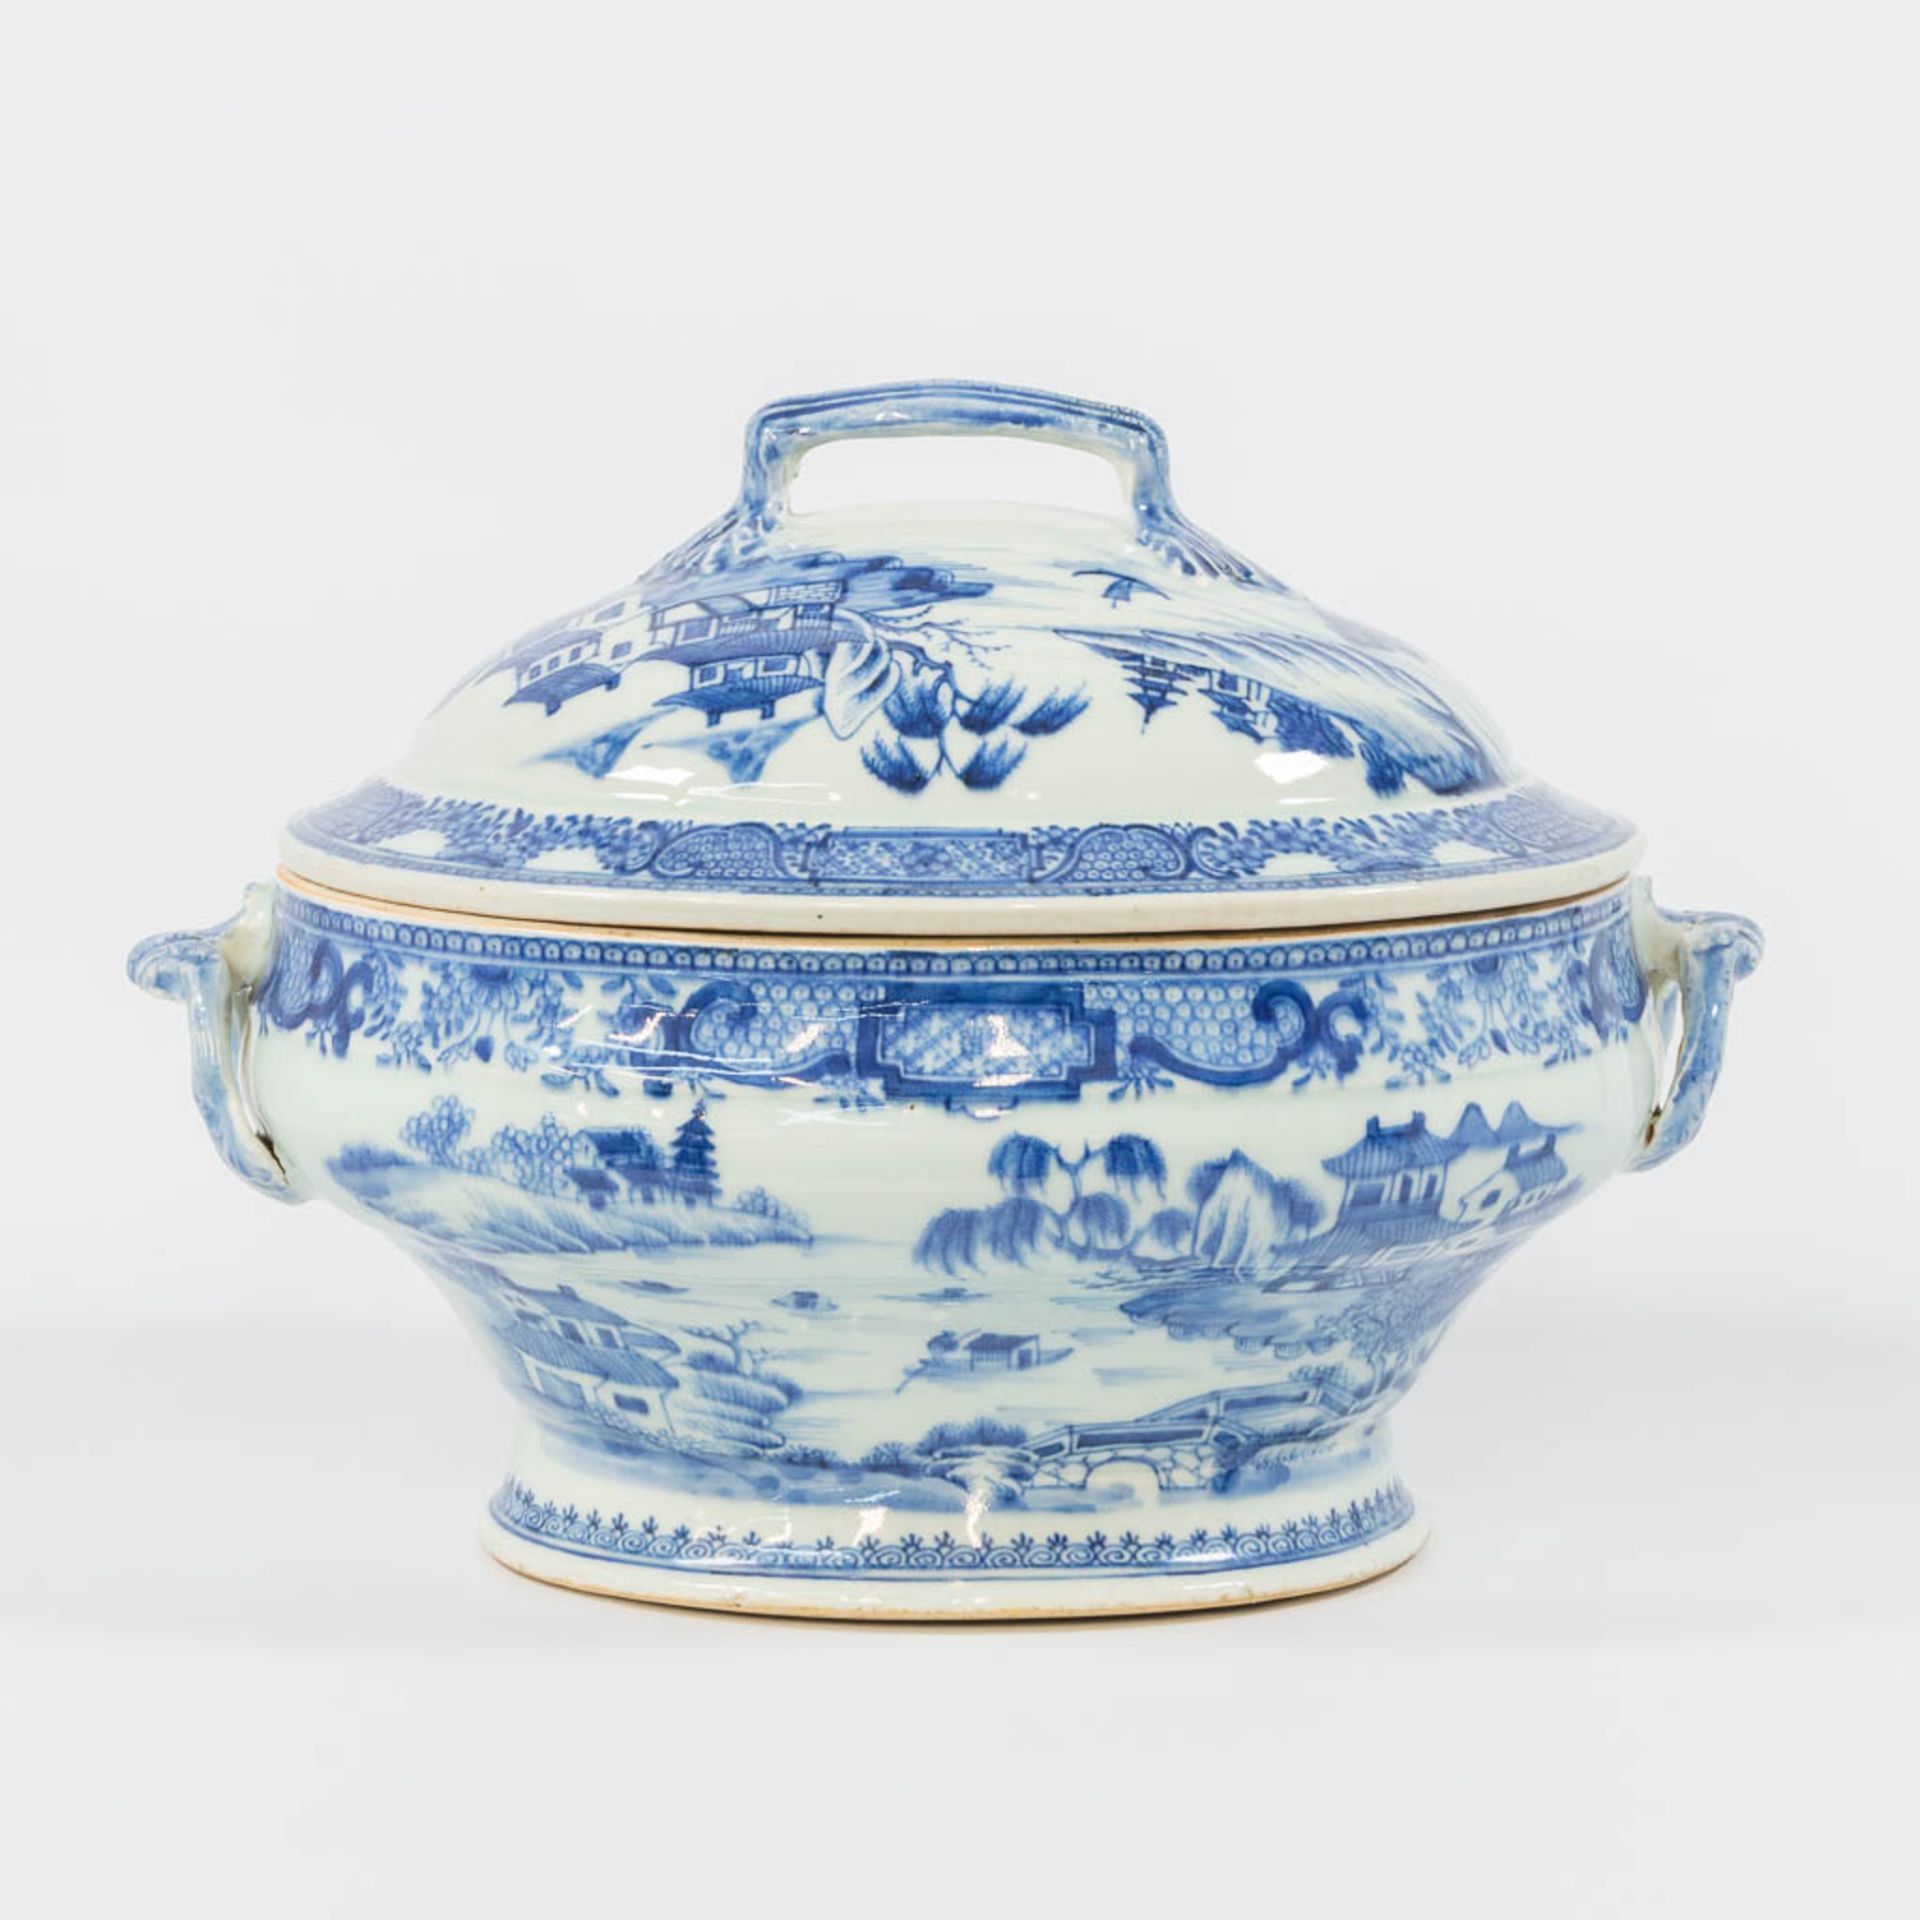 A large Chinese export porcelain blue and white tureen. 19th century. - Image 11 of 17